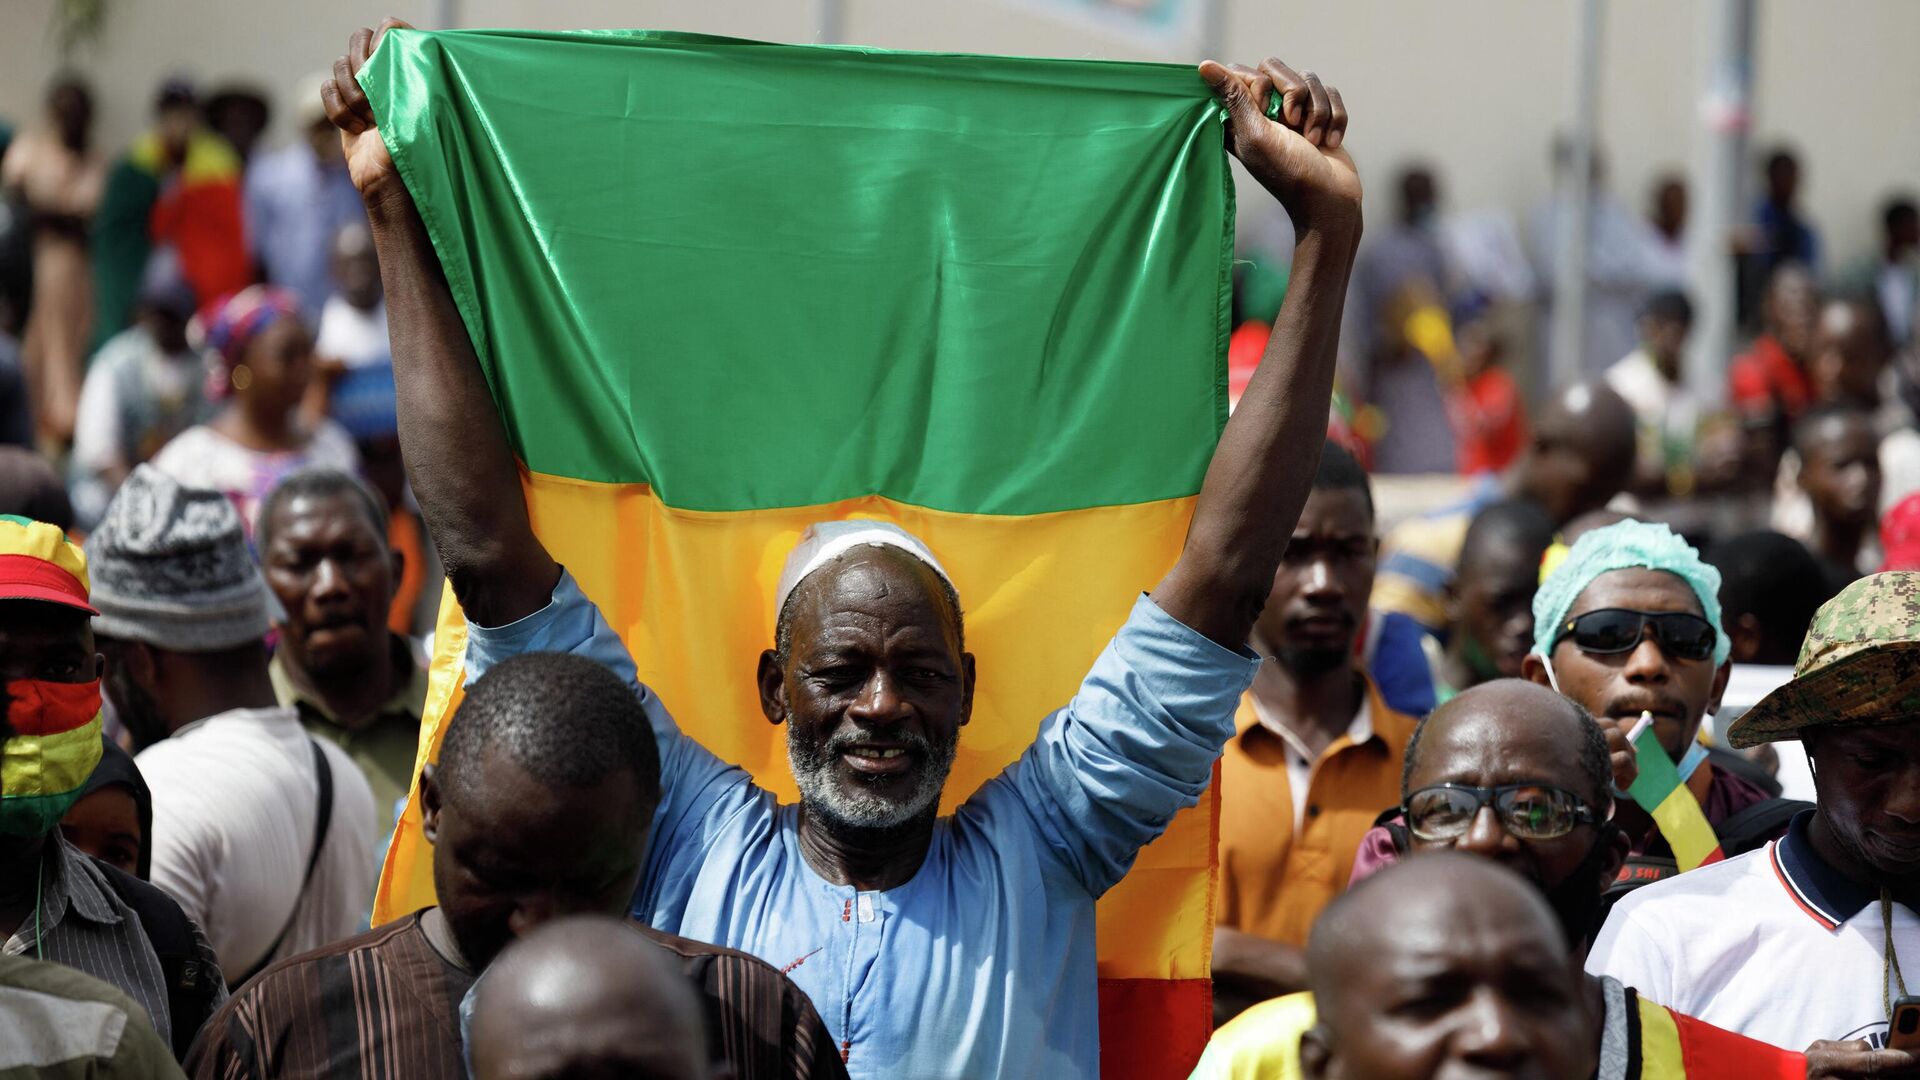 A supporter of Malian Interim President holds up the flag of Mali during a pro-Junta and pro-Russia rally in Bamako on May 13, 2022. - Several hundred Malians have gathered in Bamako to support the junta, the army and military cooperation with the Russians, AFP journalists report. (Photo by OUSMANE MAKAVELI / AFP) - Sputnik International, 1920, 24.09.2022